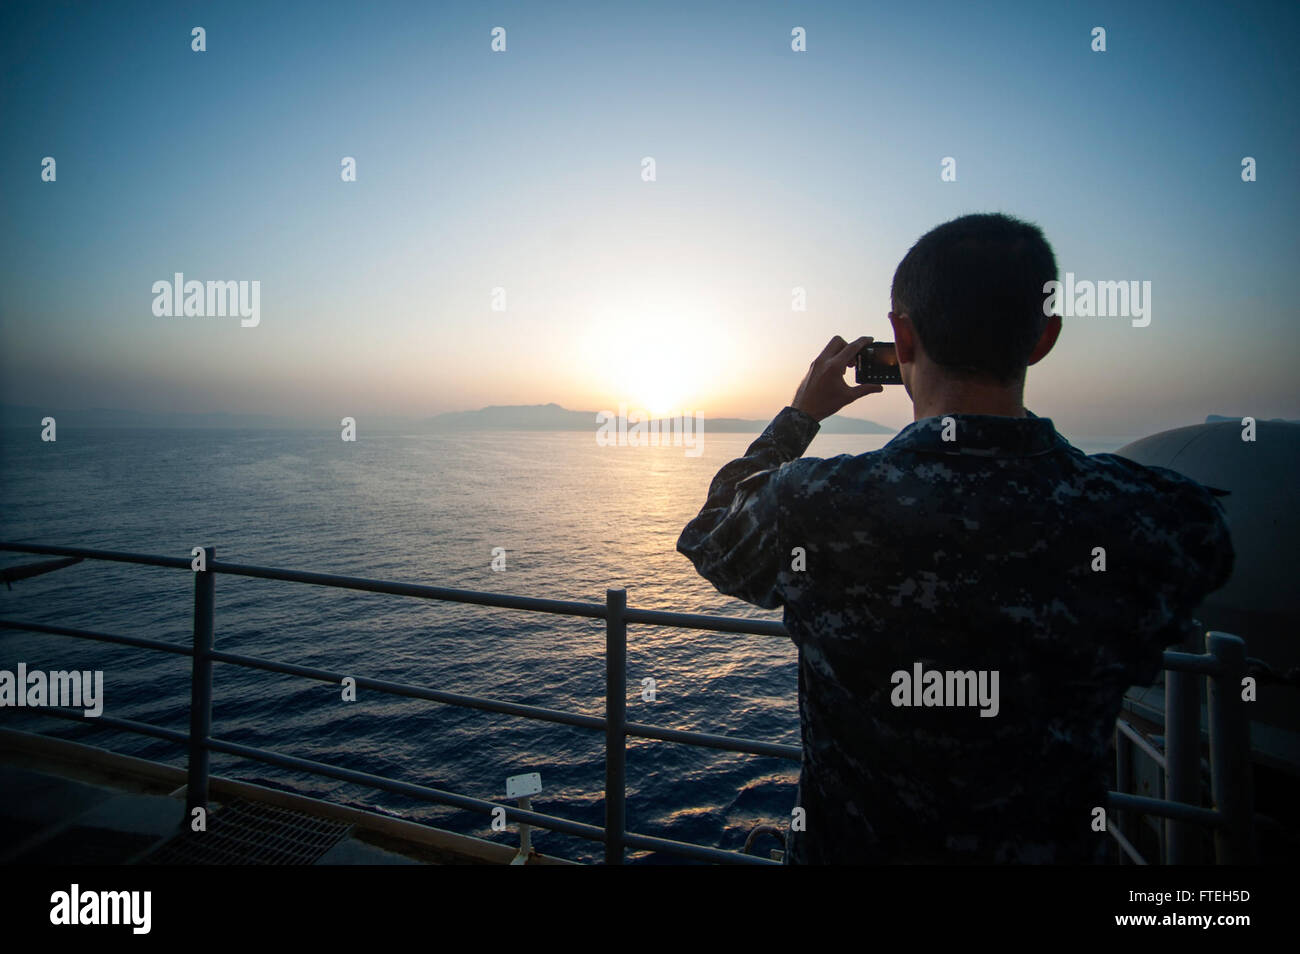 NAPLES, Italy (Oct. 10, 2014) -- A Sailor aboard the amphibious assault ship USS Bataan (LHD 5) takes a sunrise photo prior to pulling into Naples, Italy. The Bataan Amphibious Ready Group is on a scheduled deployment supporting maritime security operations, providing crisis response capability and theater security cooperation efforts in the U.S. 6th Fleet area of operations. Stock Photo